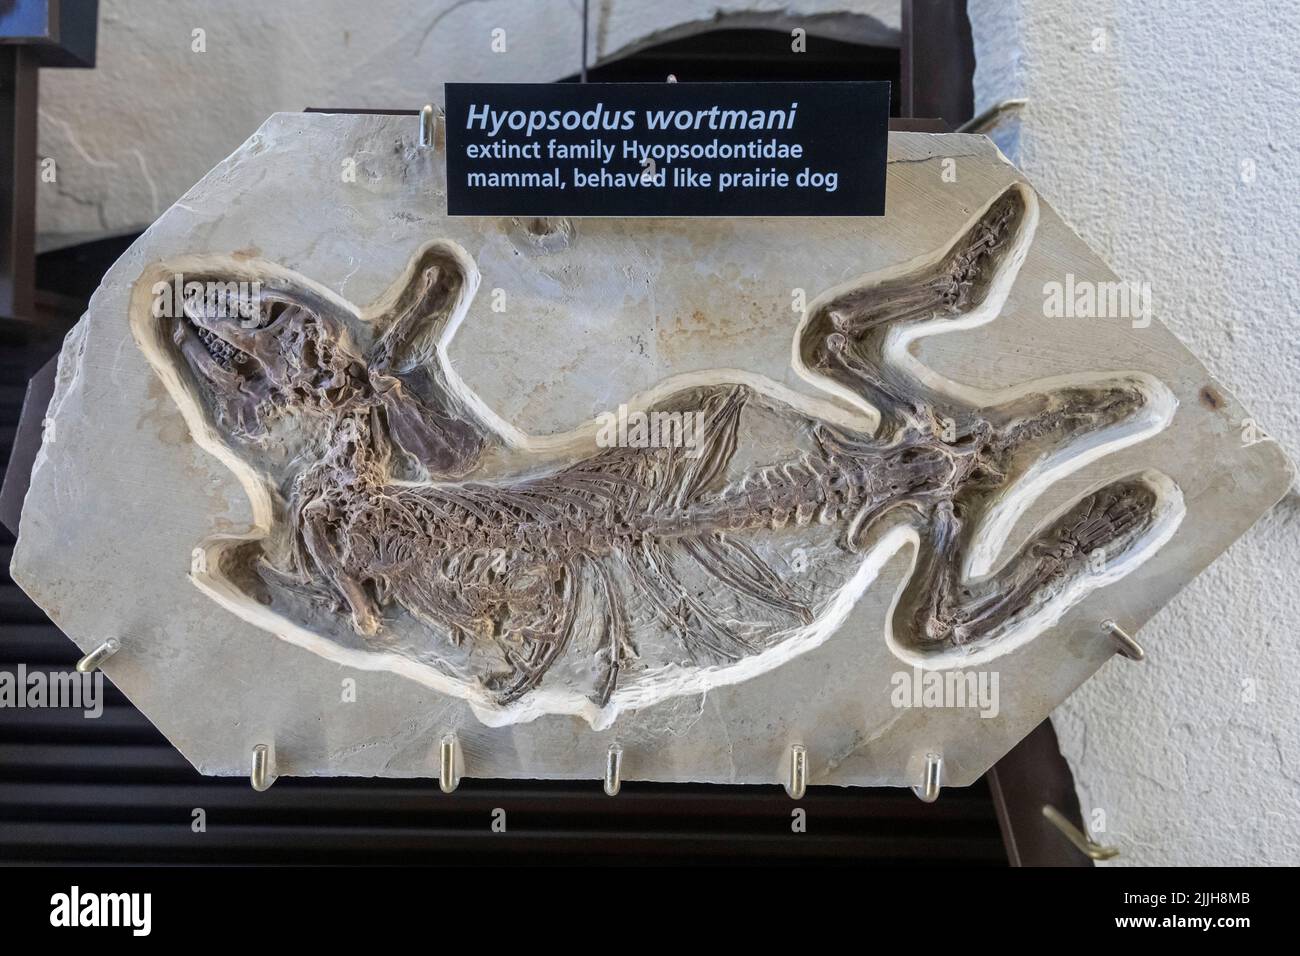 Kemmerer, Wyoming - Fossil Butte National Monument. The fossil of an extinct prairie dog-like mammal (Hyopsodus wortmani) is among fossils on display Stock Photo